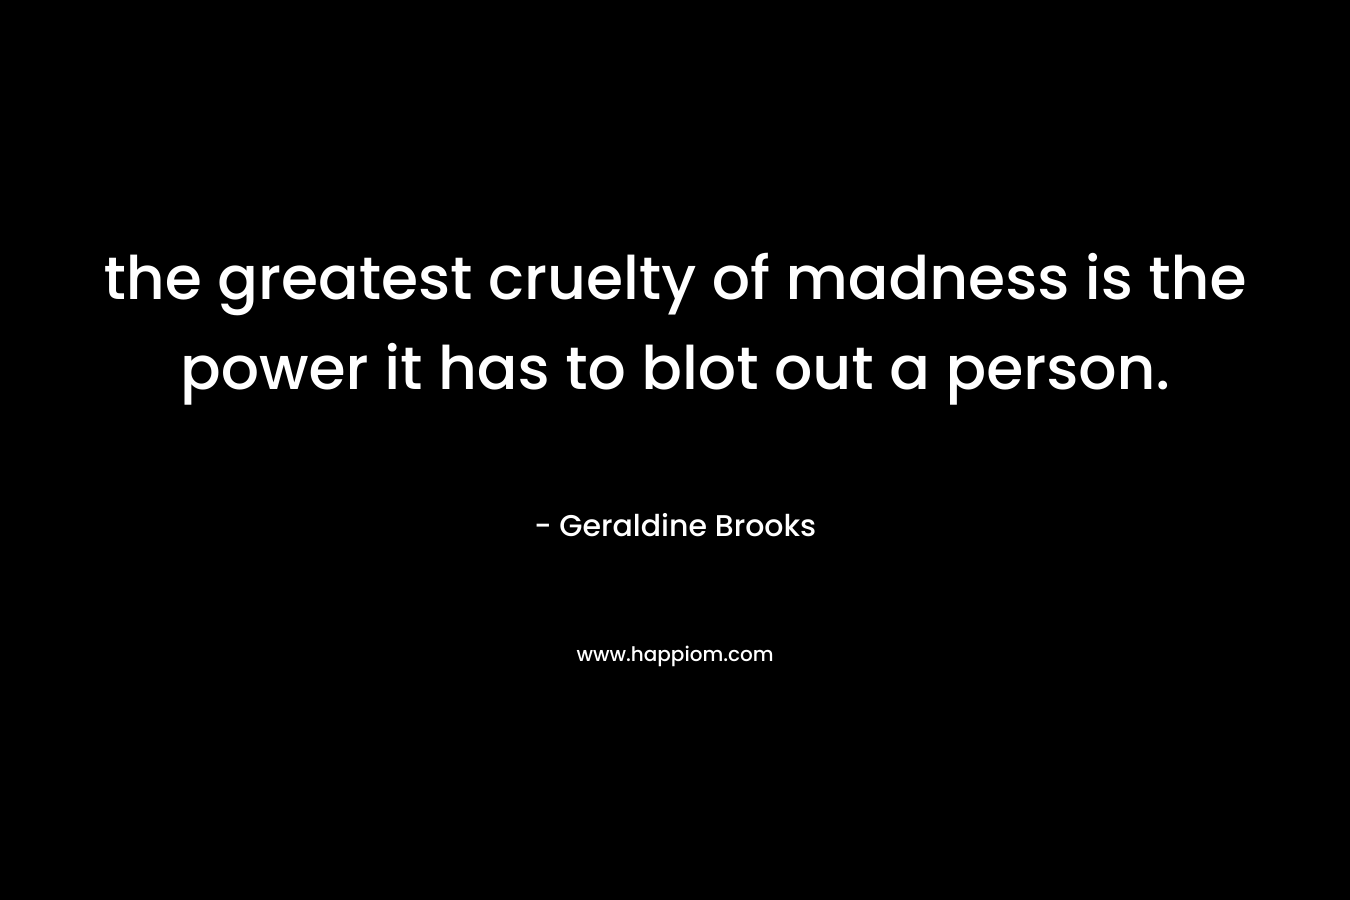 the greatest cruelty of madness is the power it has to blot out a person. – Geraldine Brooks